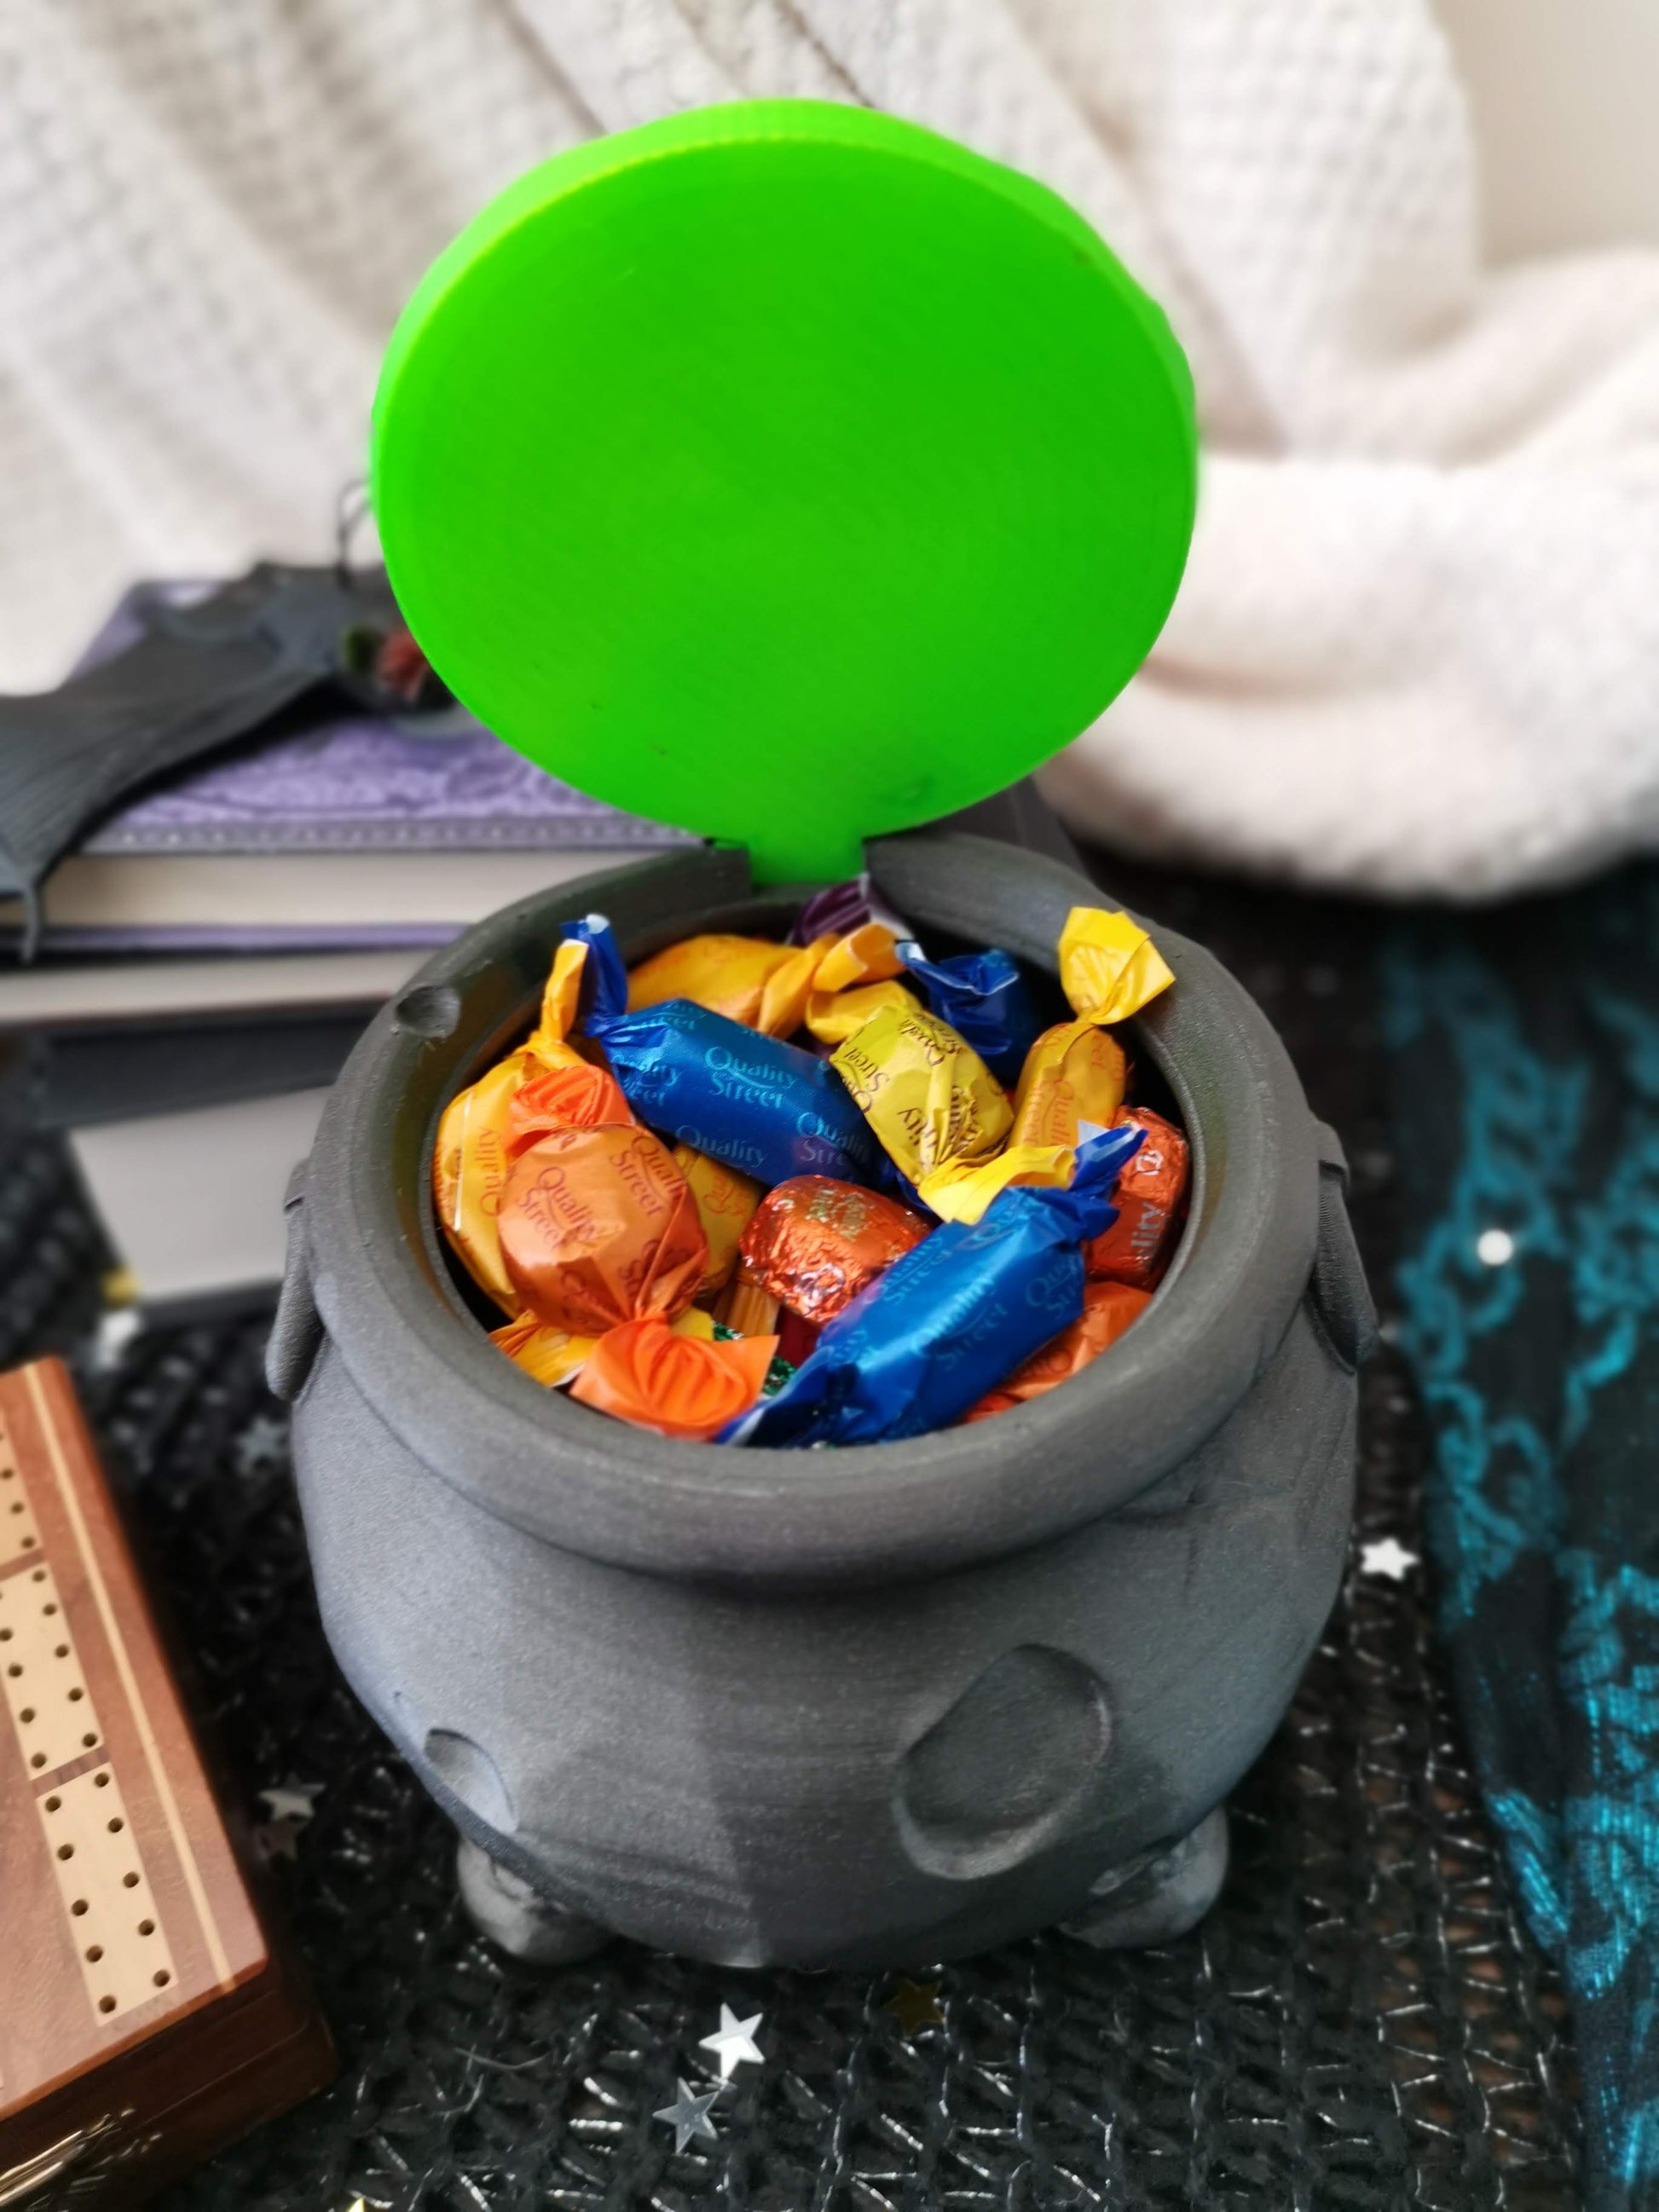 Witches cauldron with candy inside